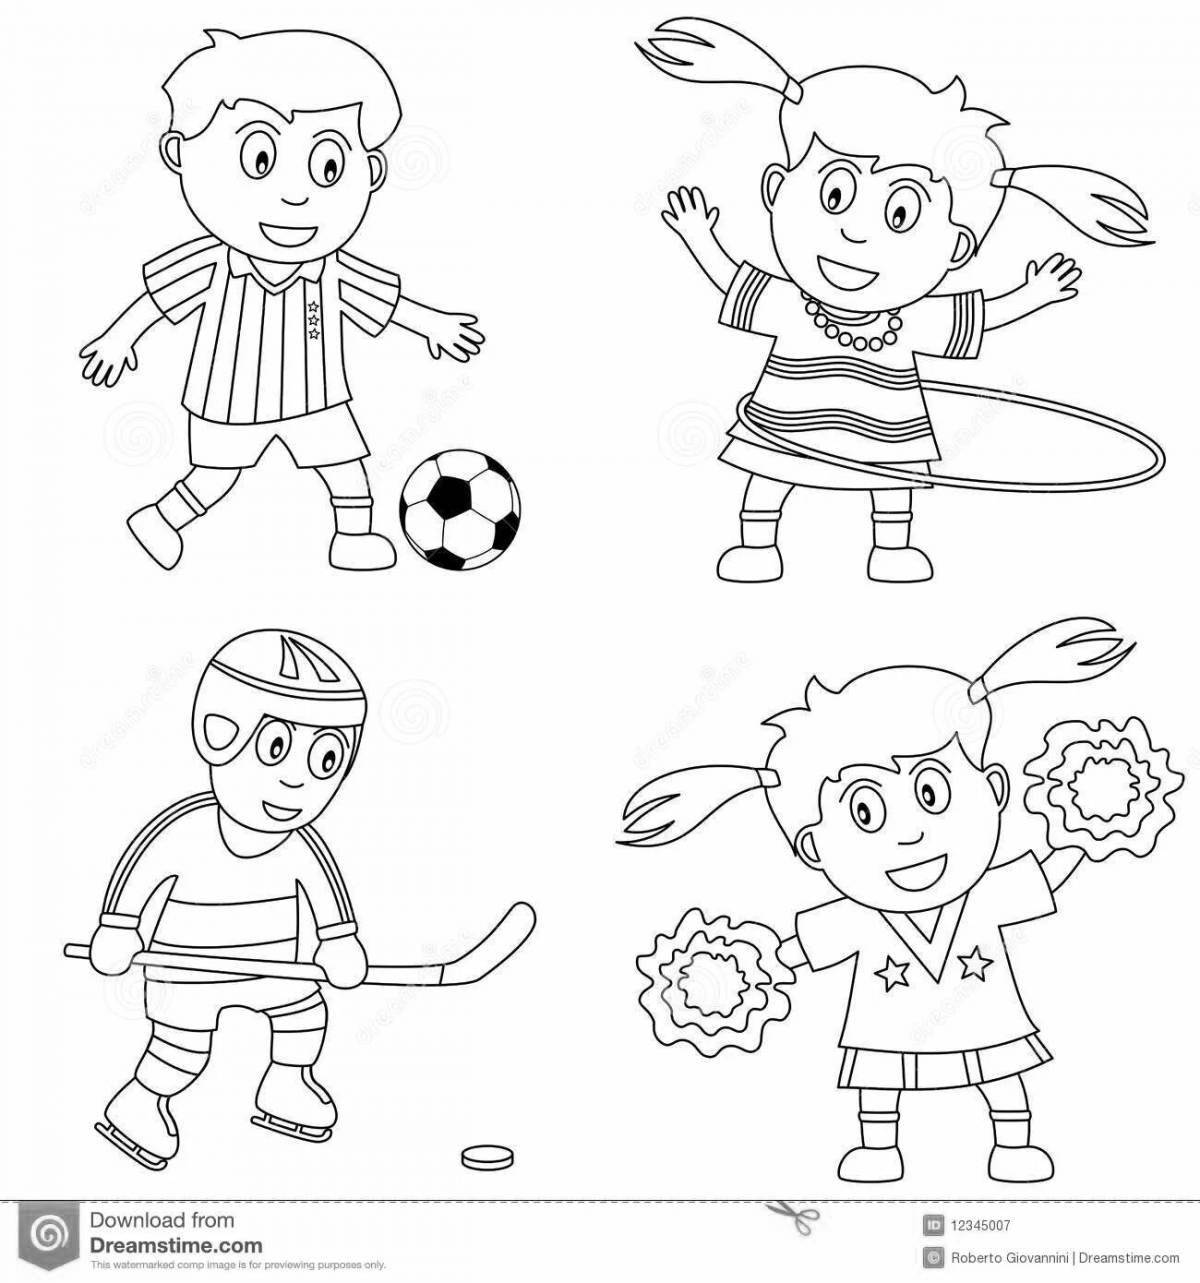 Entertaining sports coloring book for preschoolers